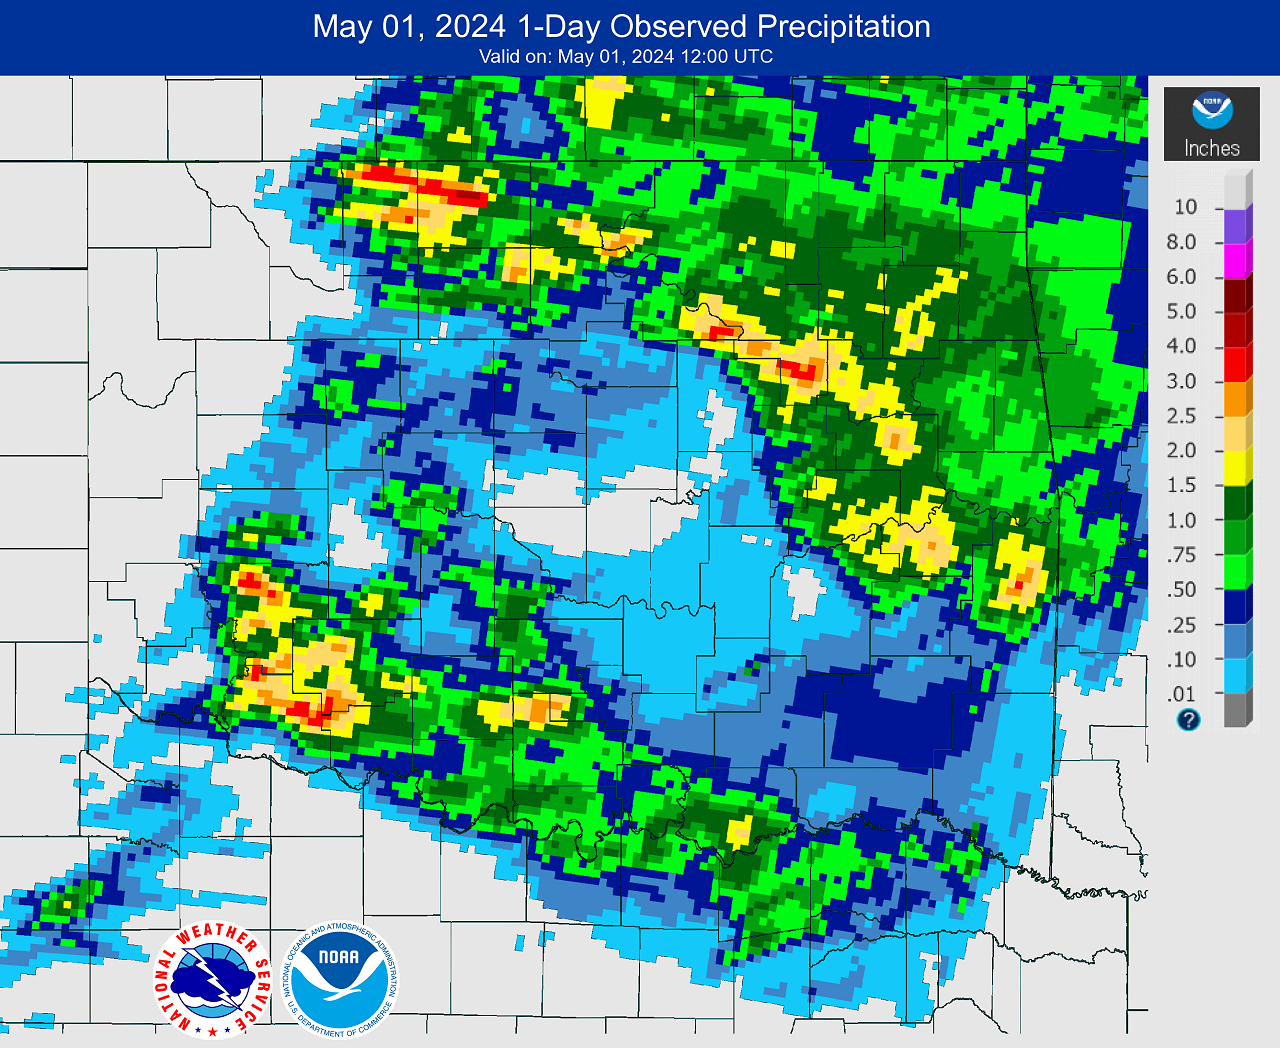 24-hour Observed Rainfall at 7 AM CDT on May 1, 2024